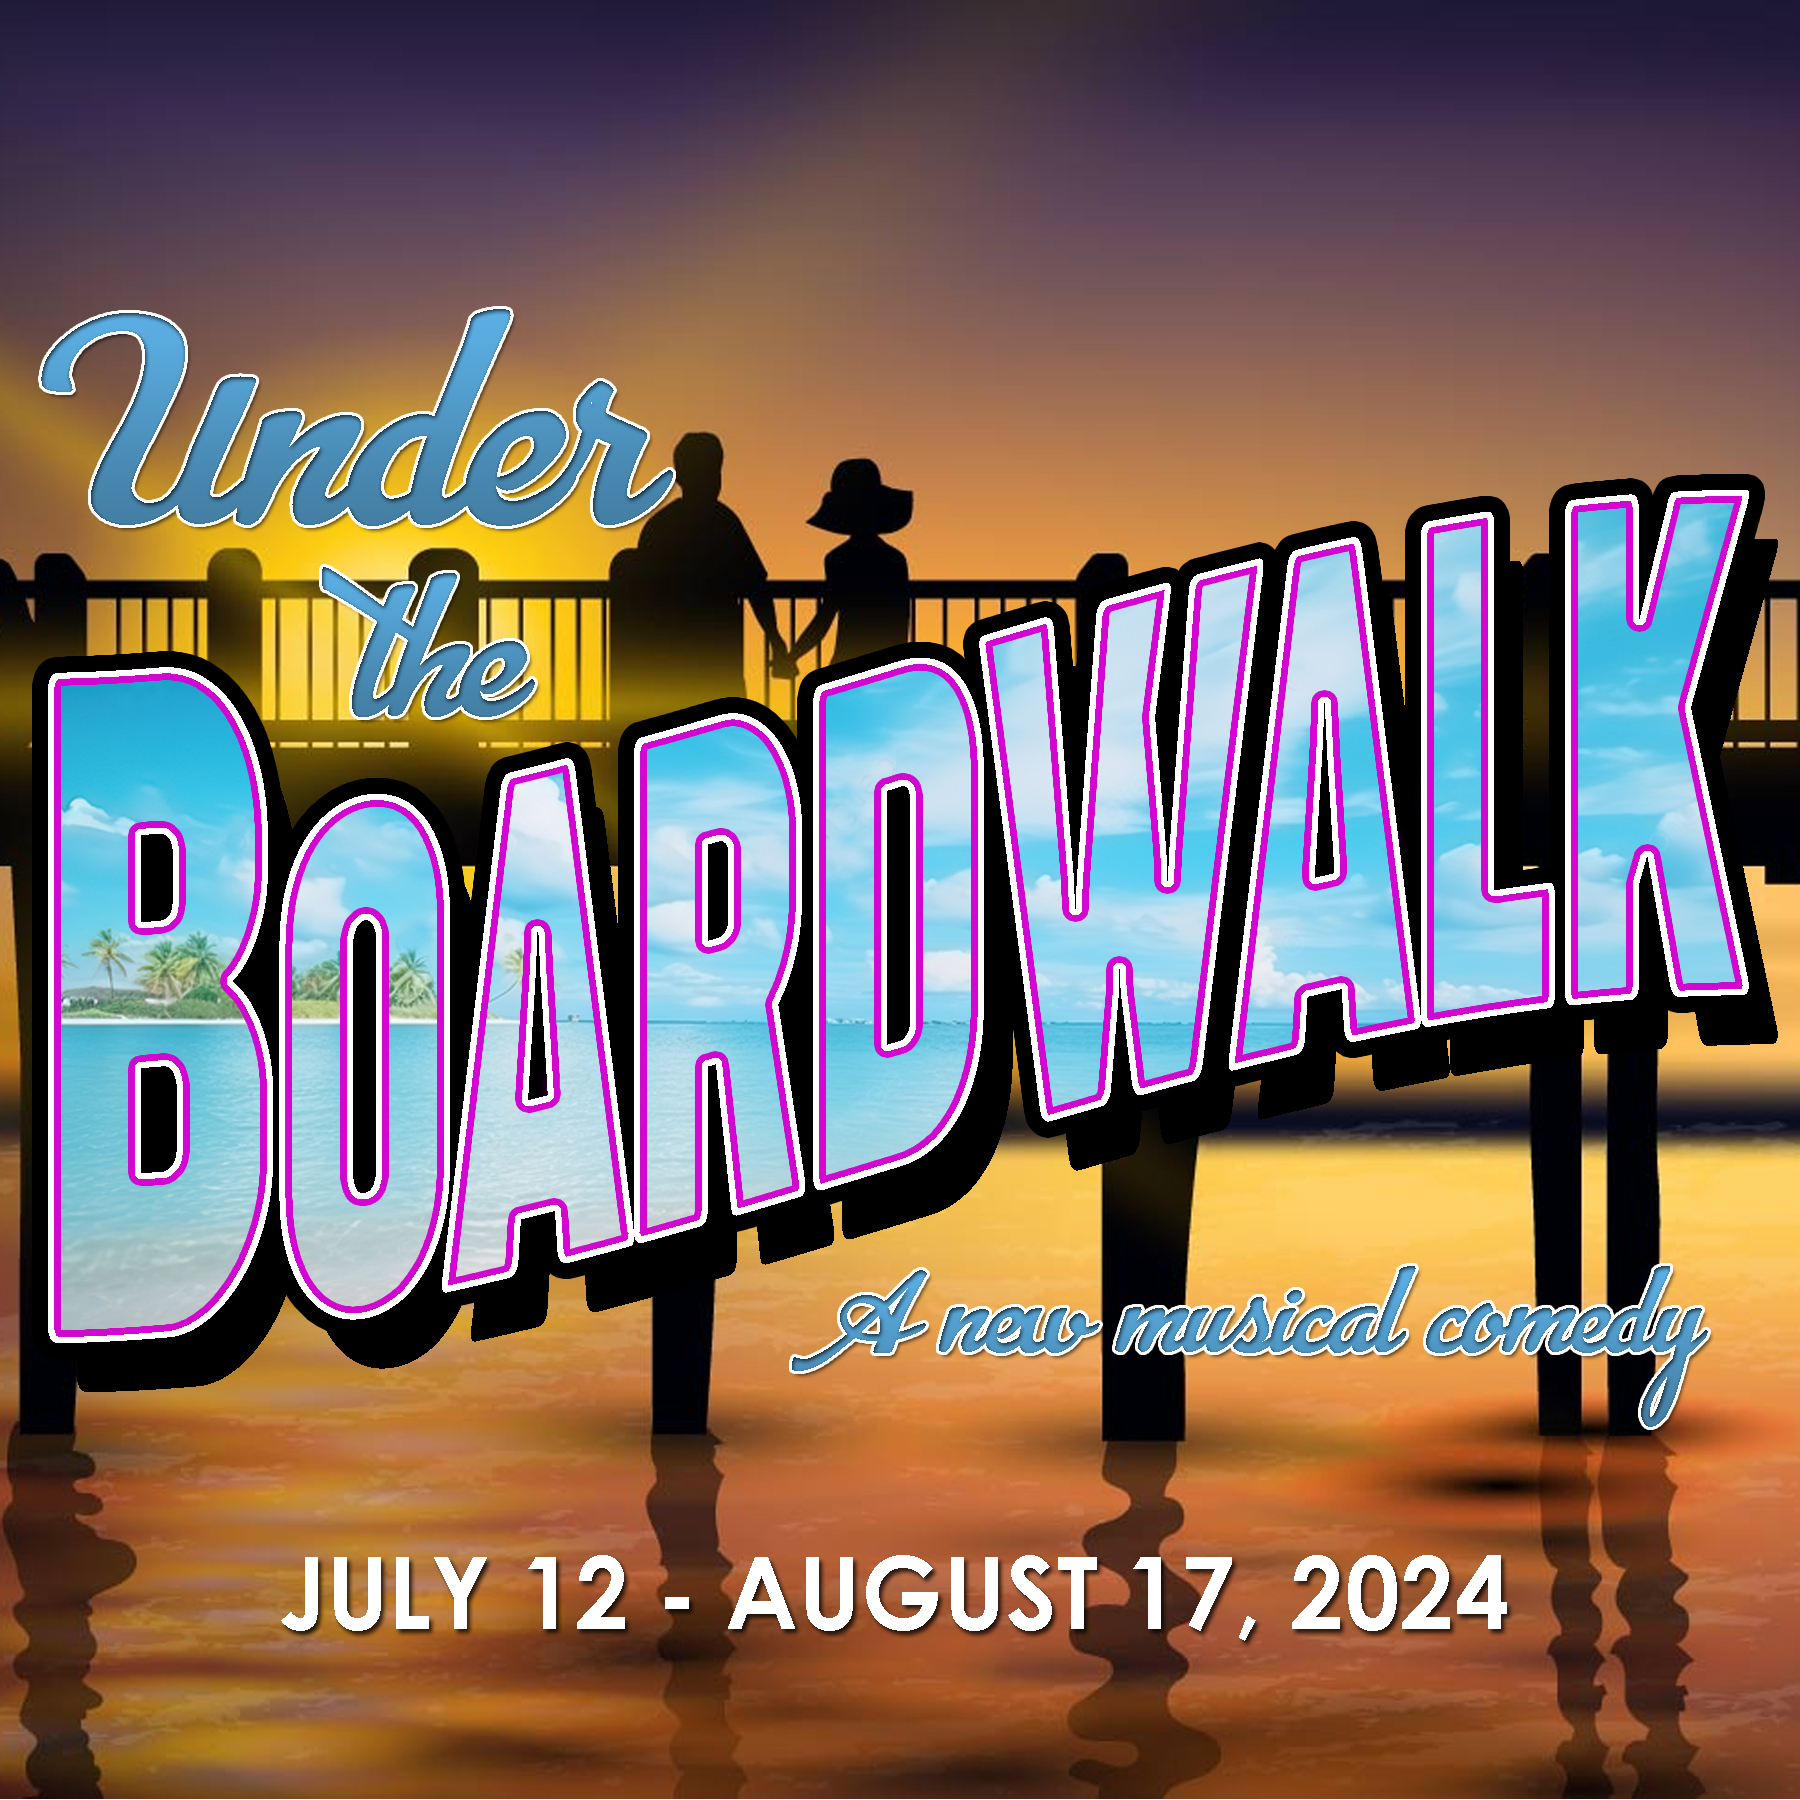 Under the Boardwalk live on stage at the Pines Dinner Theatre